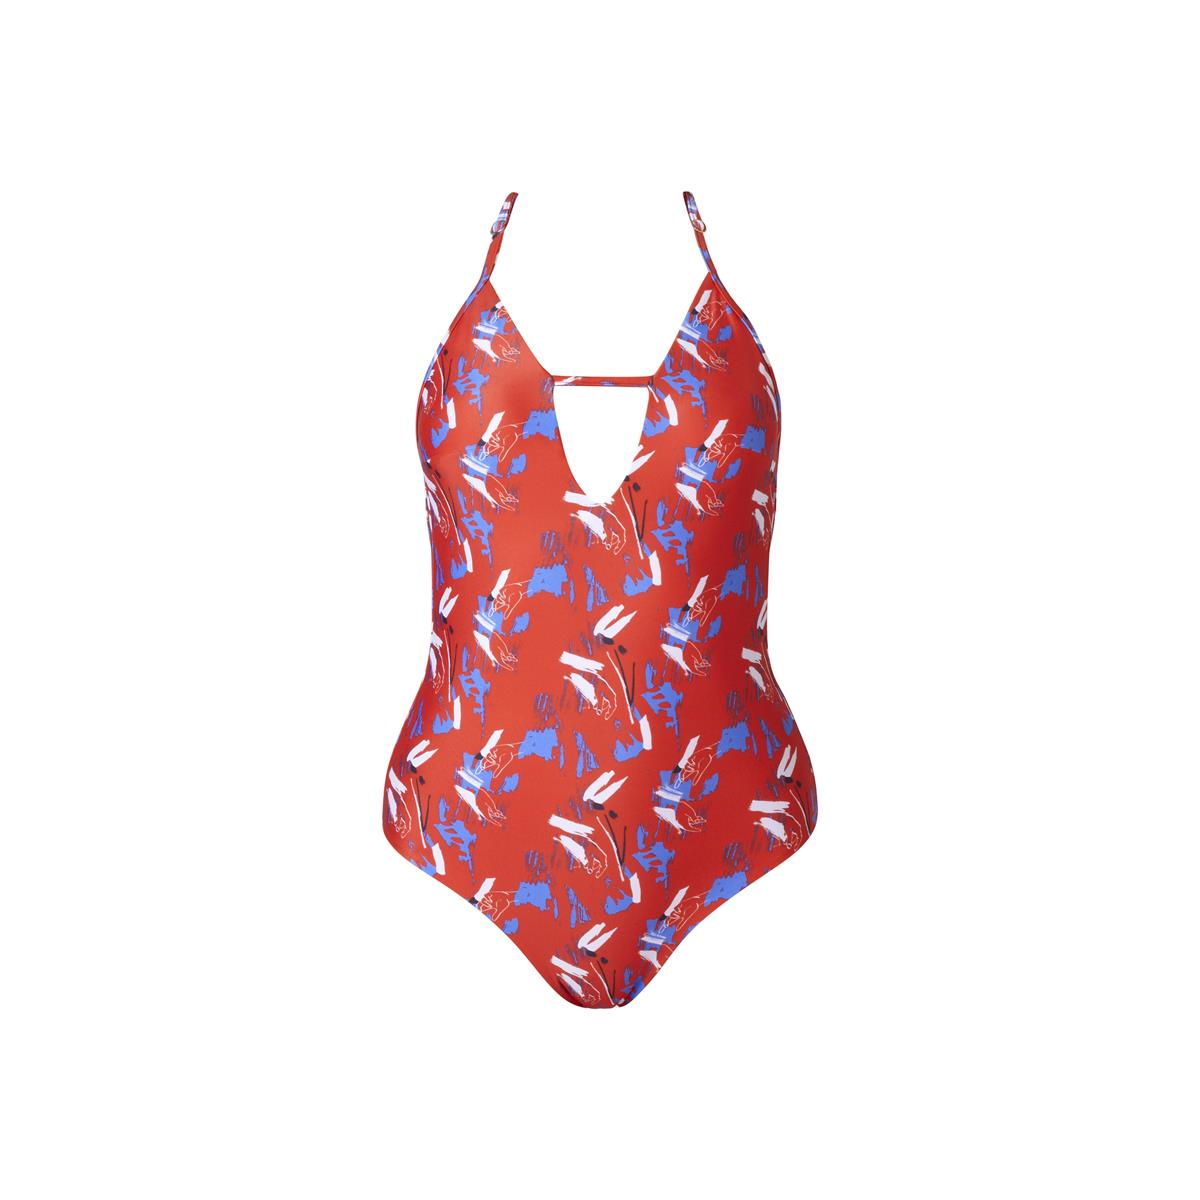 MARGARET AND HERMIONE_SS18_Swimsuit No.2_hands_EUR 197,00